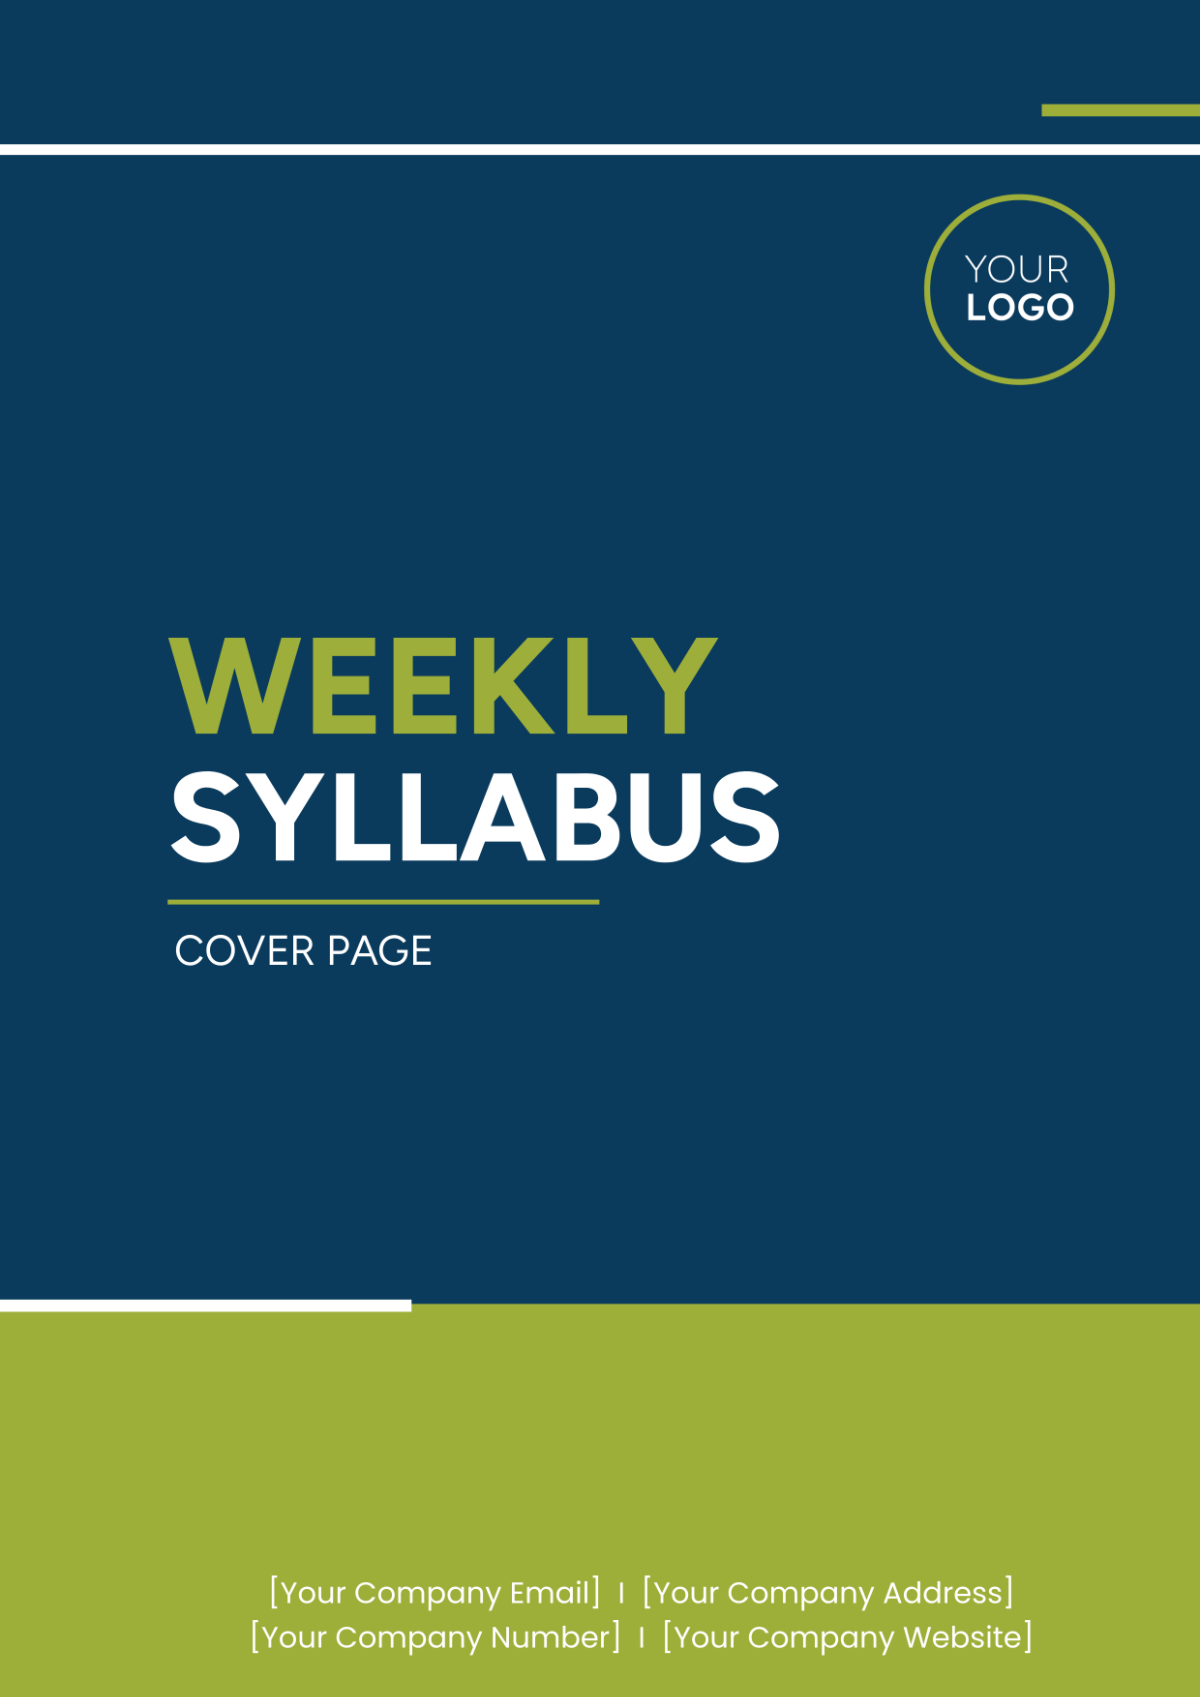 Weekly Syllabus Cover Page